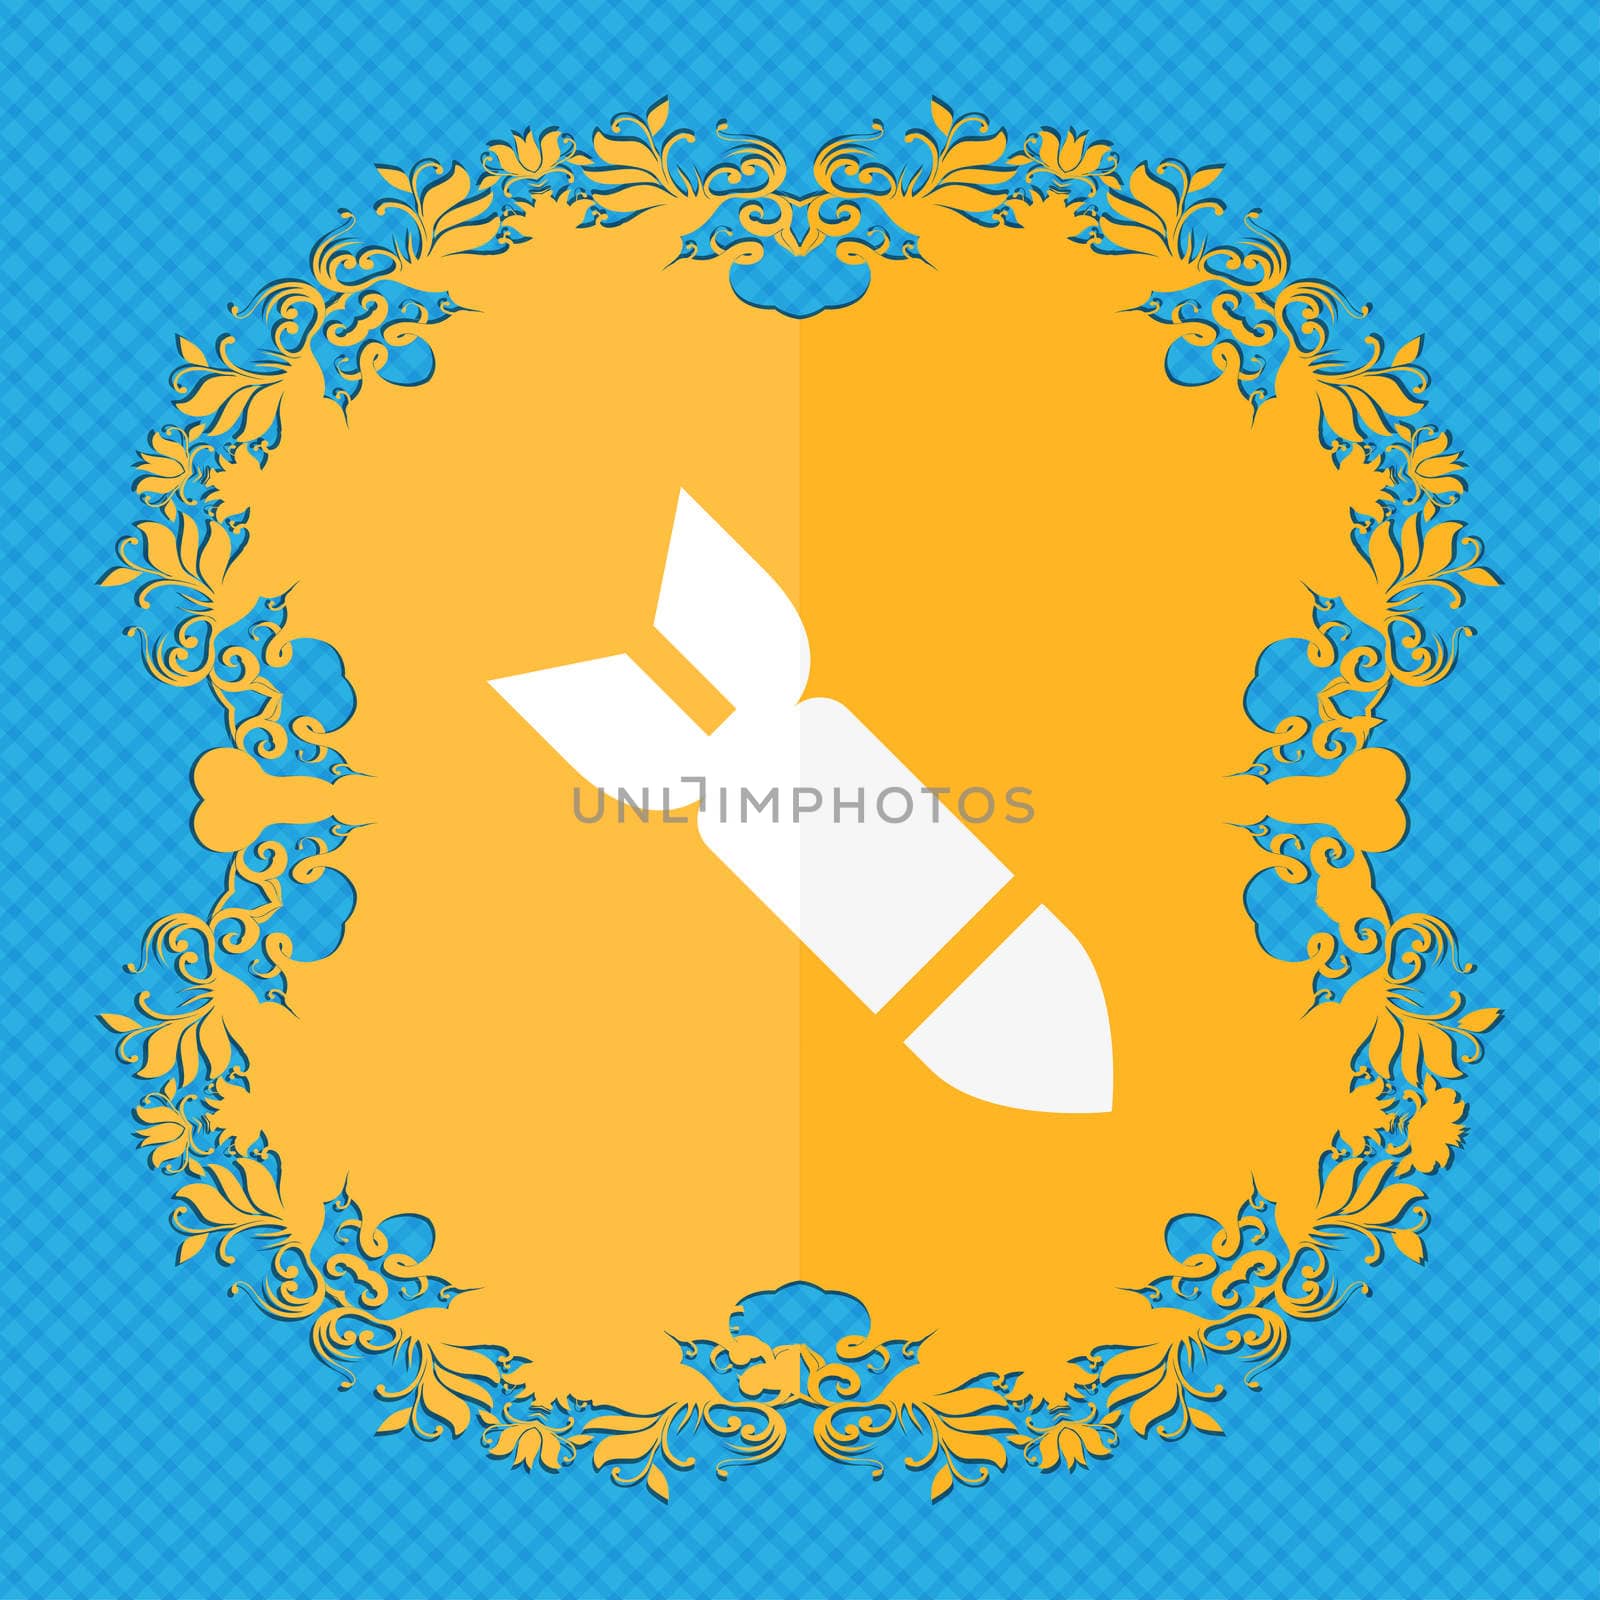 Missile,Rocket weapon . Floral flat design on a blue abstract background with place for your text. illustration